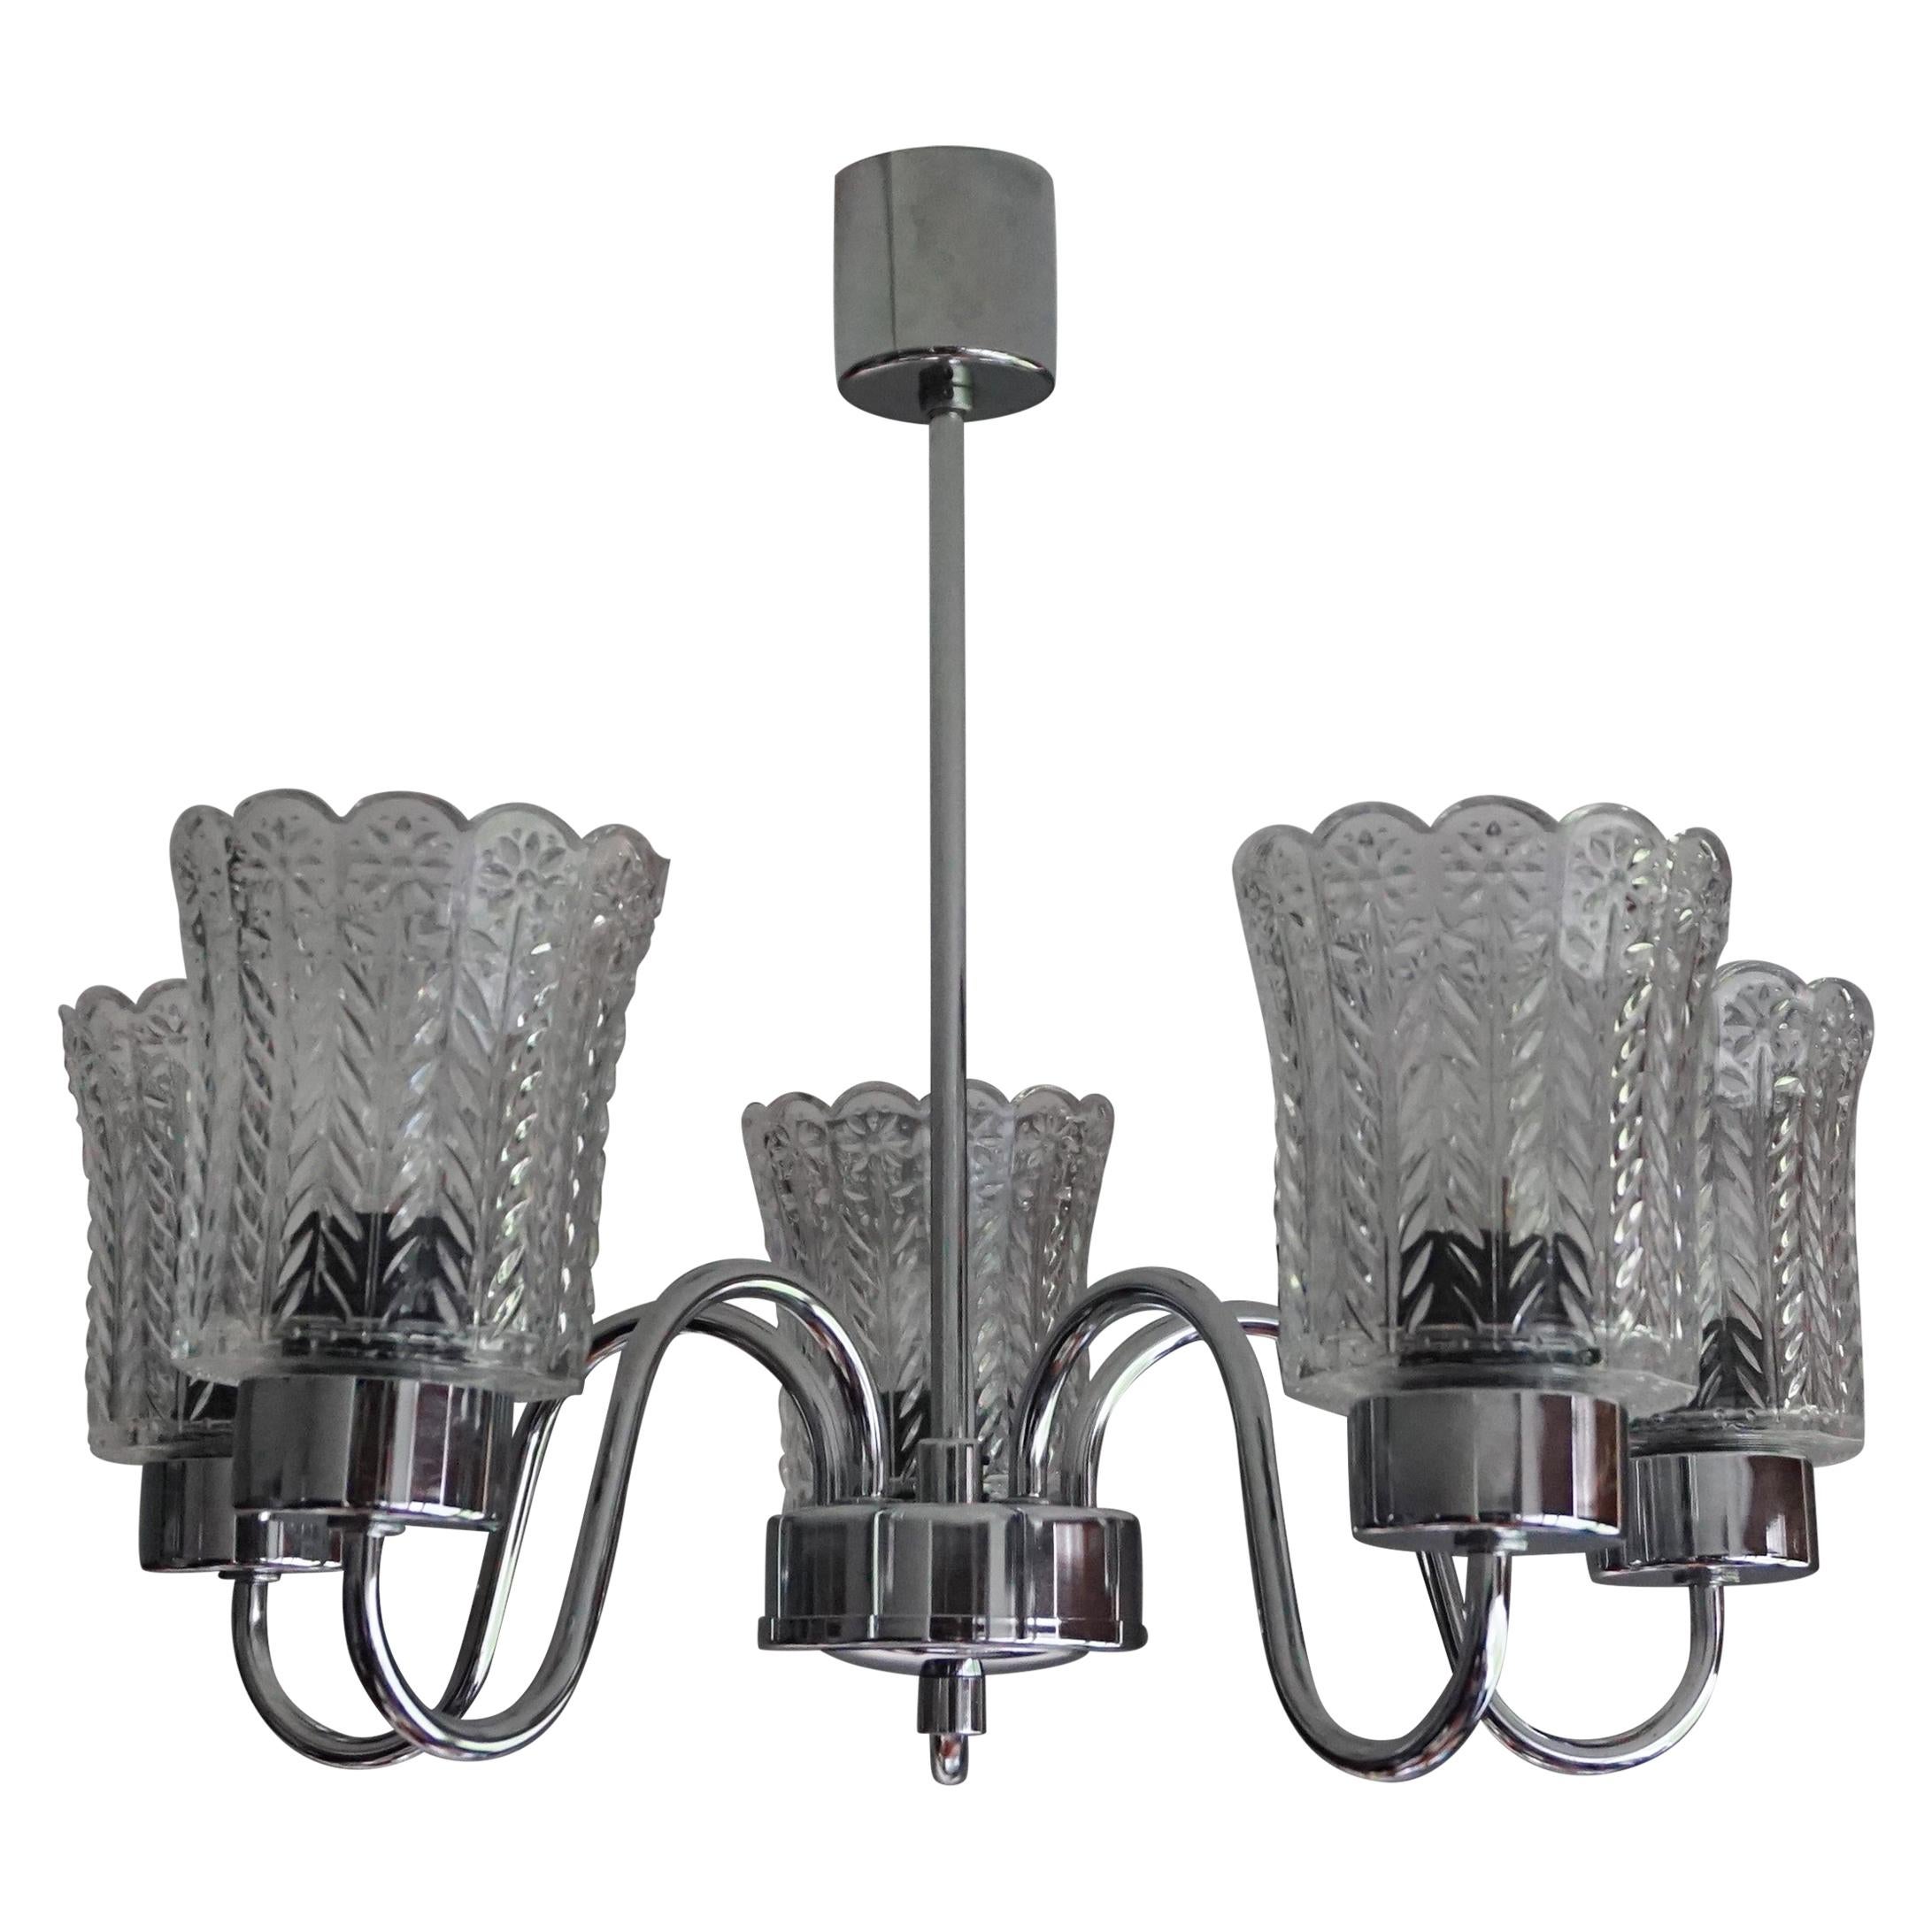 Mid-Century Modern Chrome and Glass Shades Pendant Light with Flower Patterns For Sale